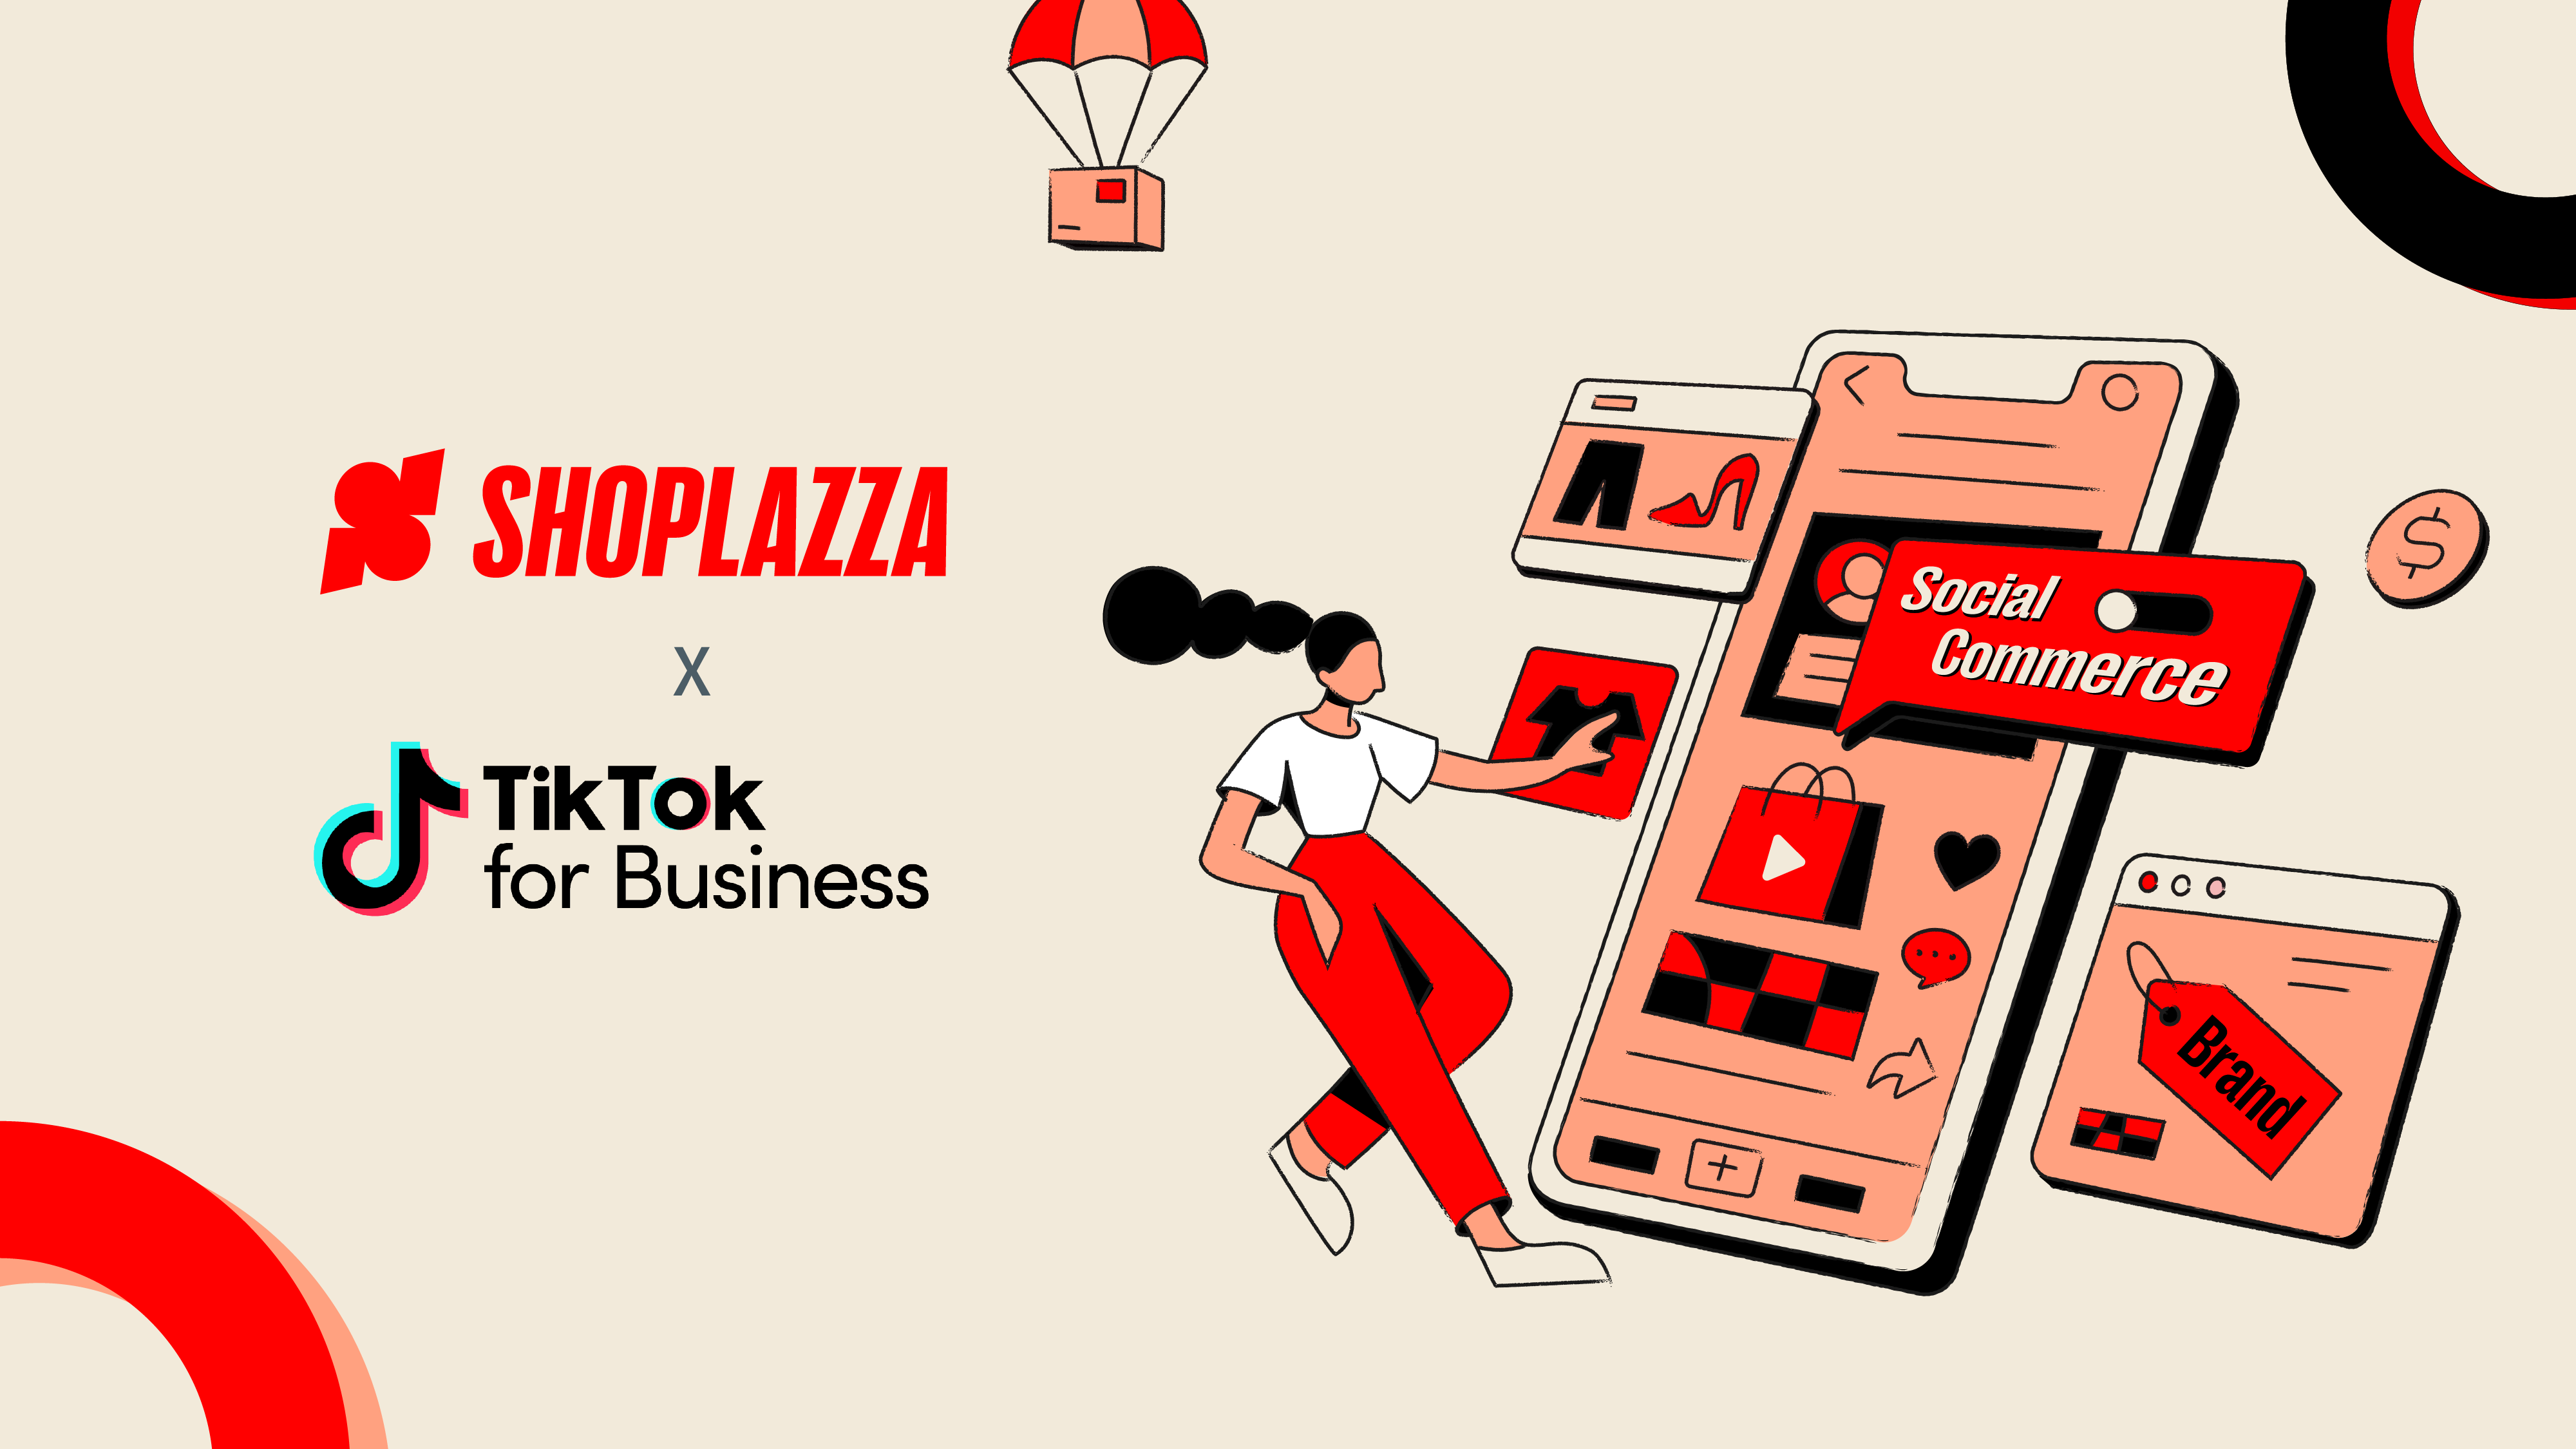 Shoplazza Partners With TikTok to Deliver More Traffic Driving Options